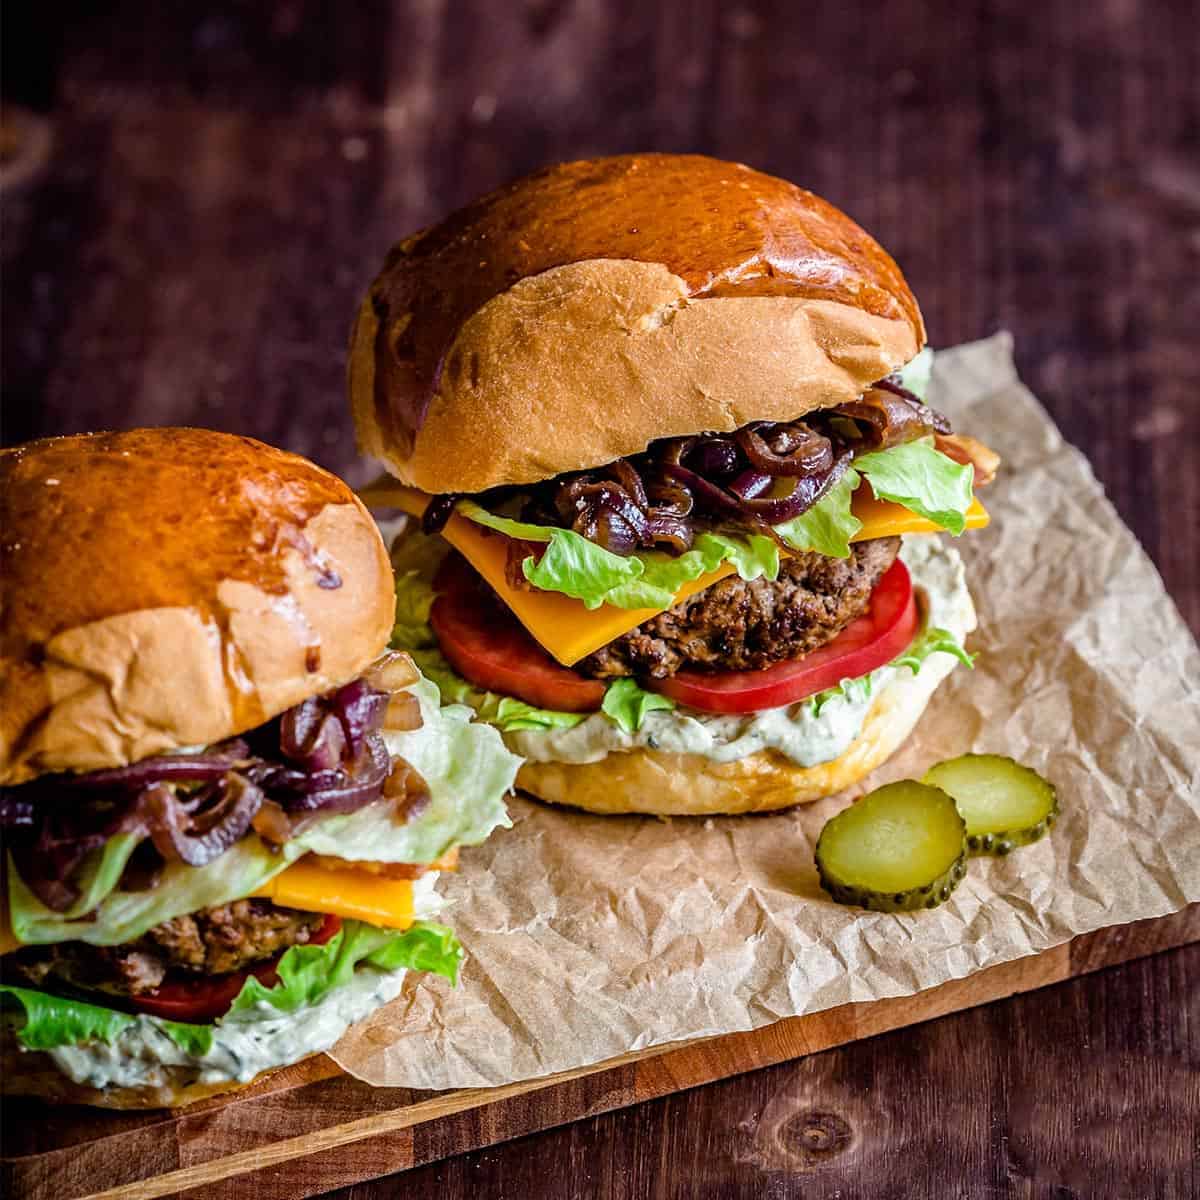 Loaded burgers with bacon, caramelized onions, & avocado crema